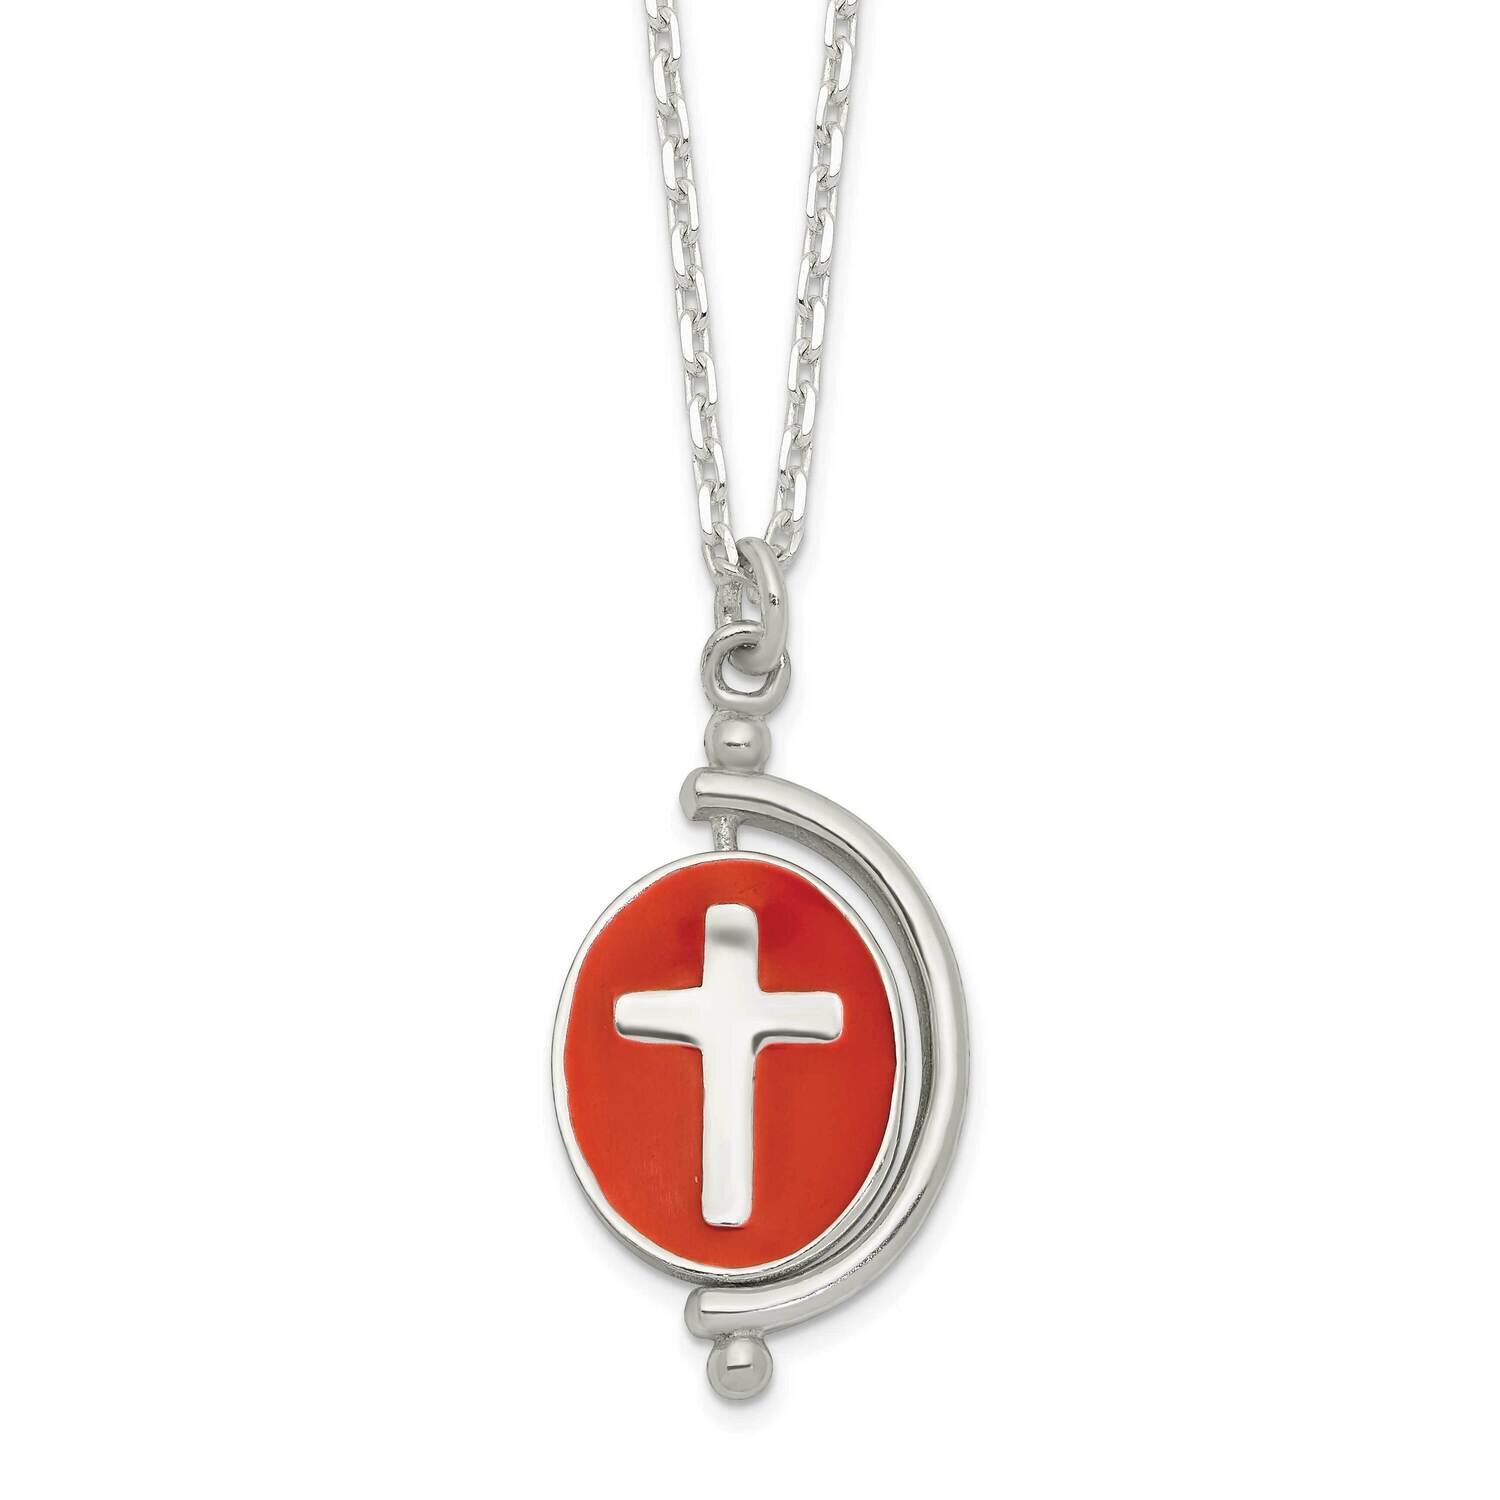 Reversible Enameled Faith Cross Necklace 18 Inch Sterling Silver Polished QG6065-18